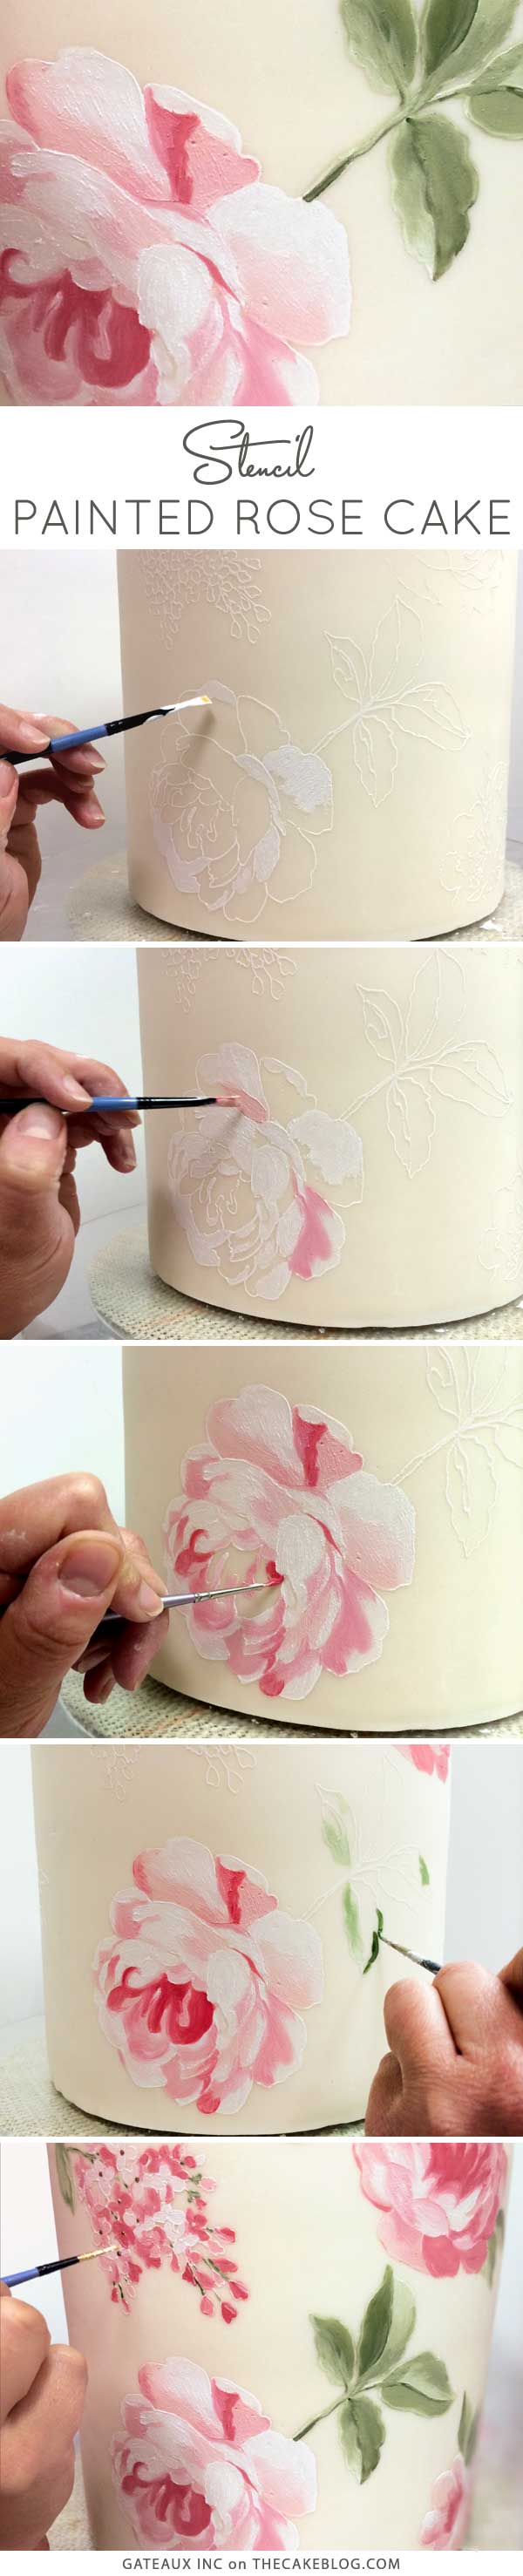 How to stencil-paint a cake | Learn how from Gateaux Inc on TheCakeBlog.com